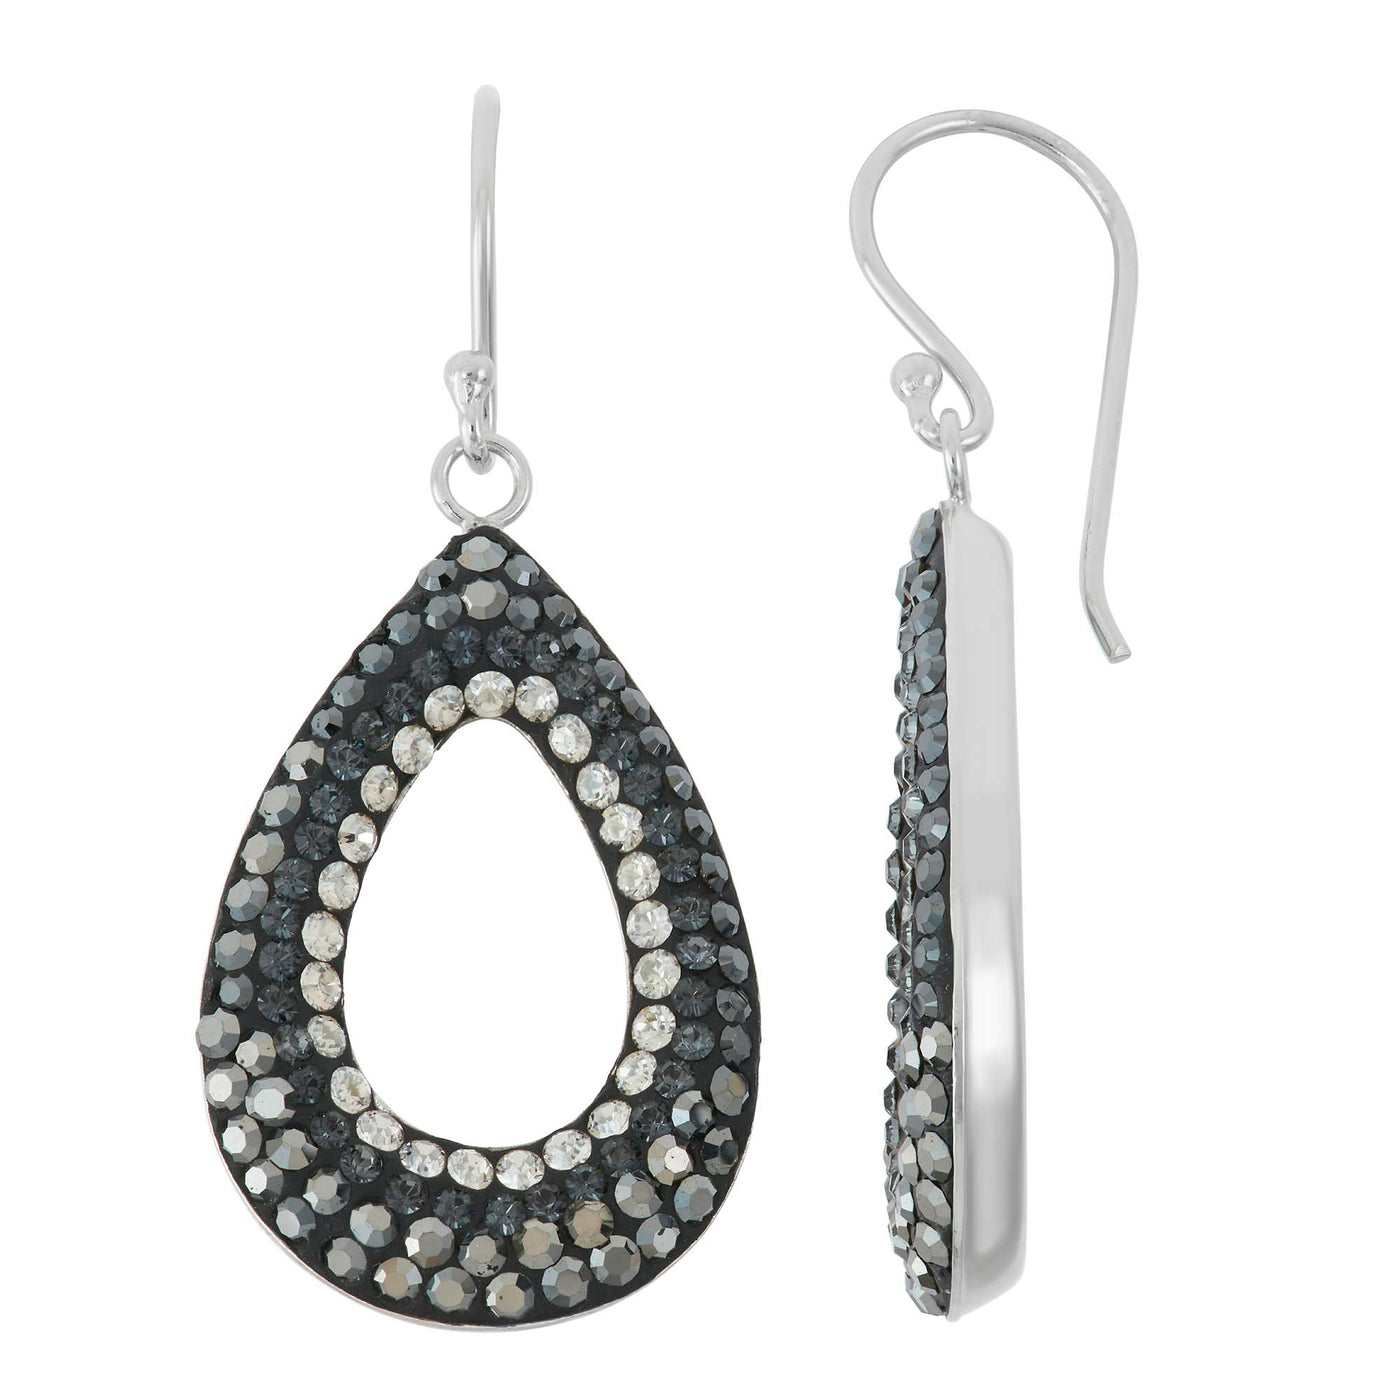 Rebecca Sloane Silver Earring Studded With Grey And Black Crystal